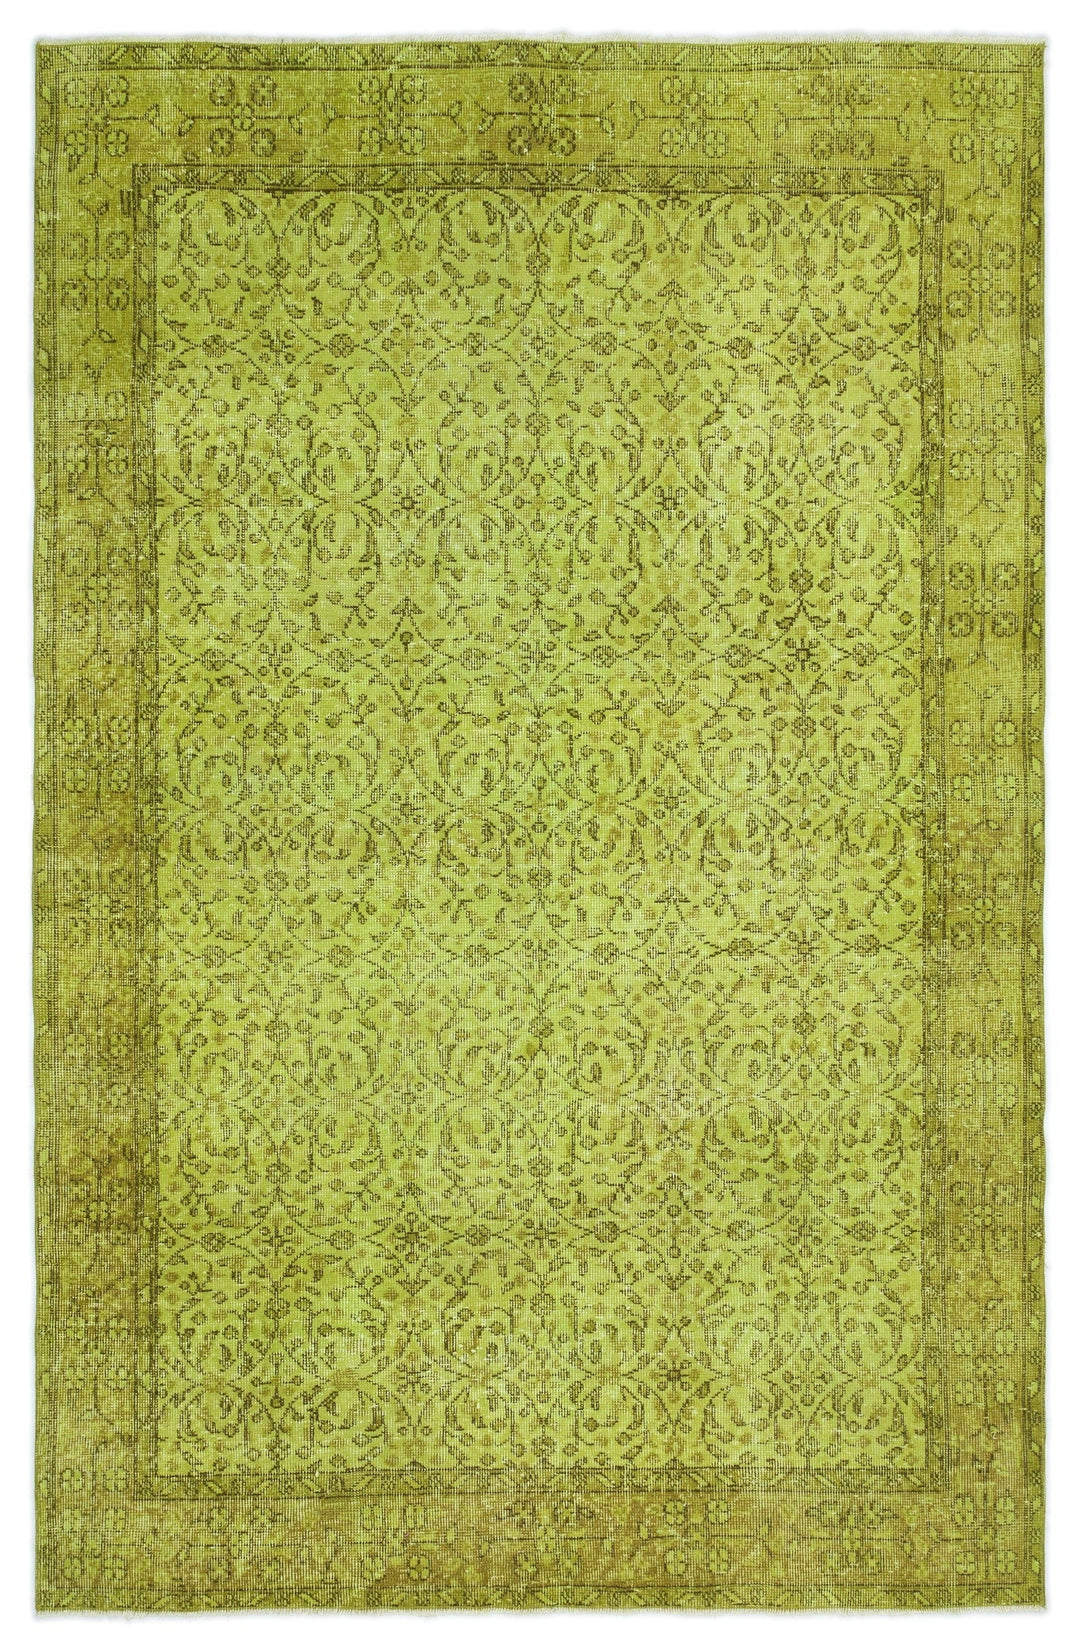 Athens Yellow Tumbled Wool Hand Woven Carpet 159 x 245